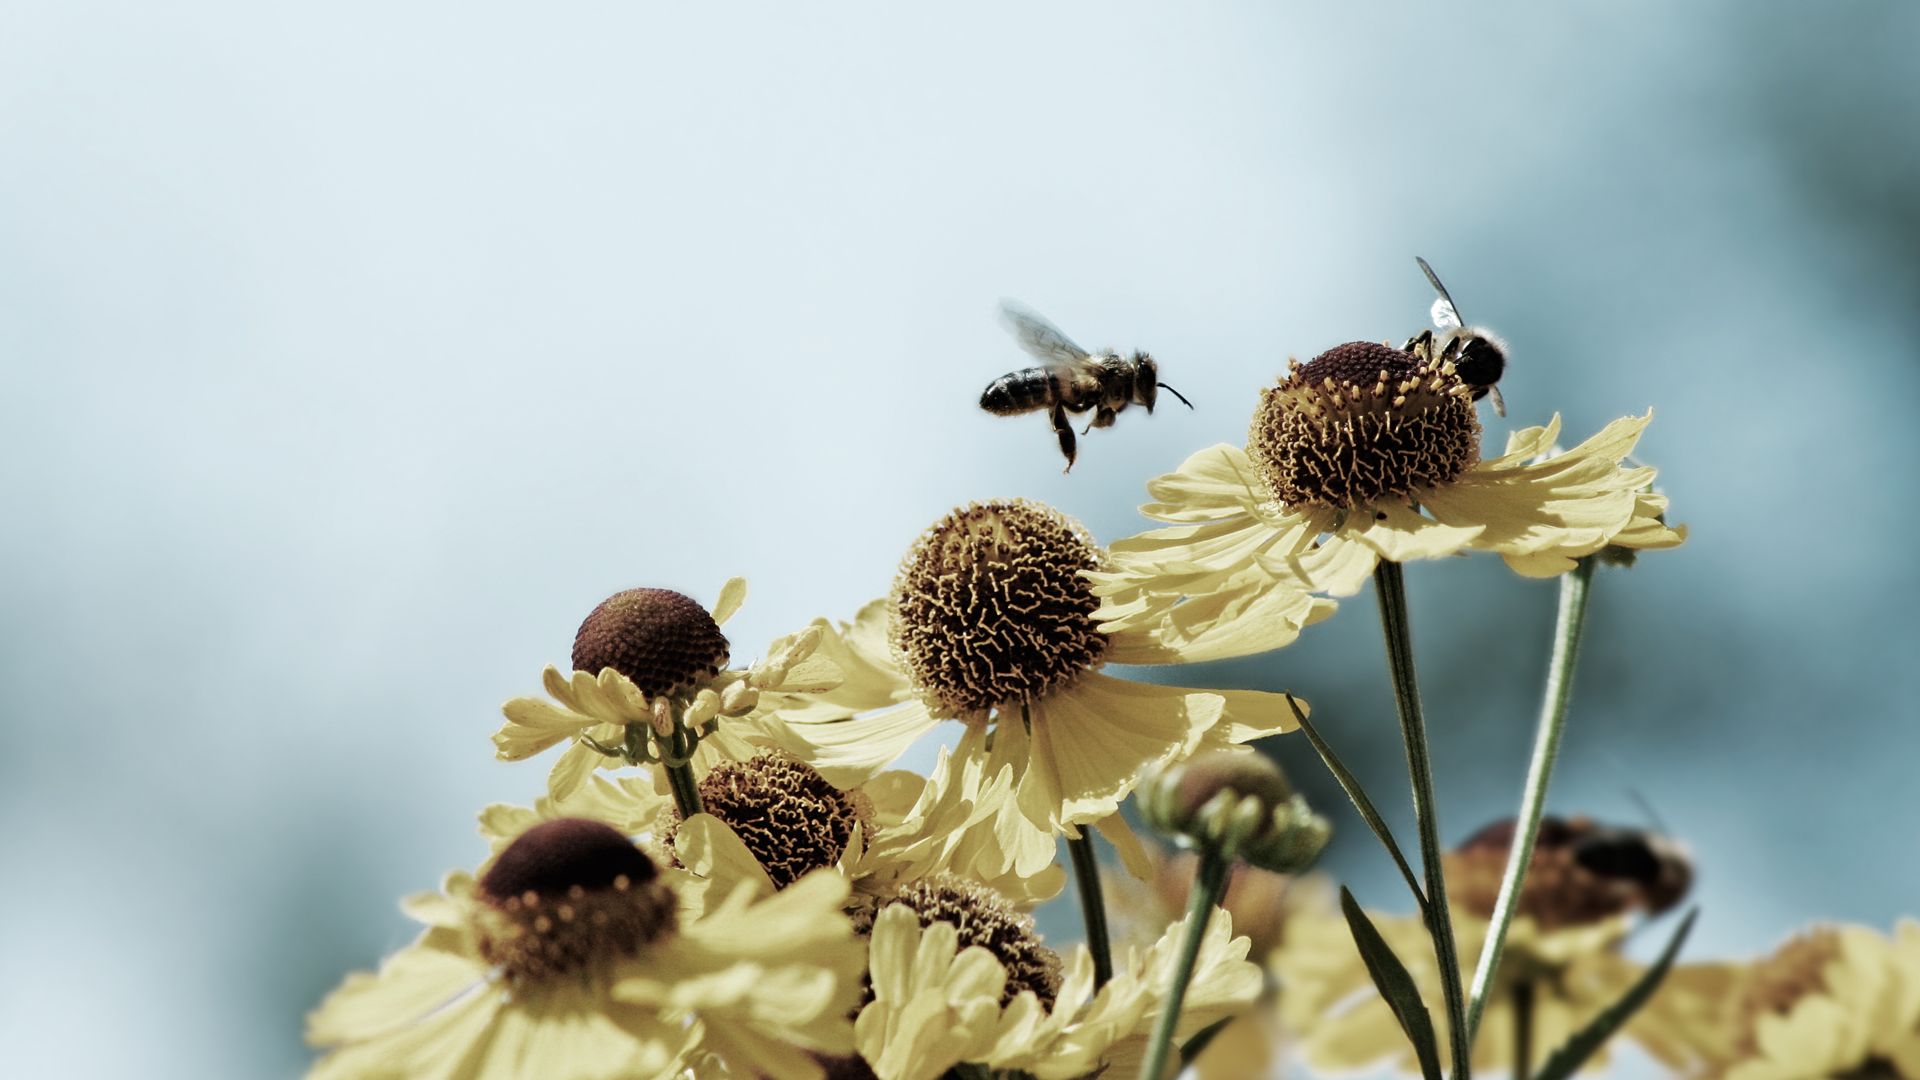 Bees And Flowers HD Wallpaperx1080